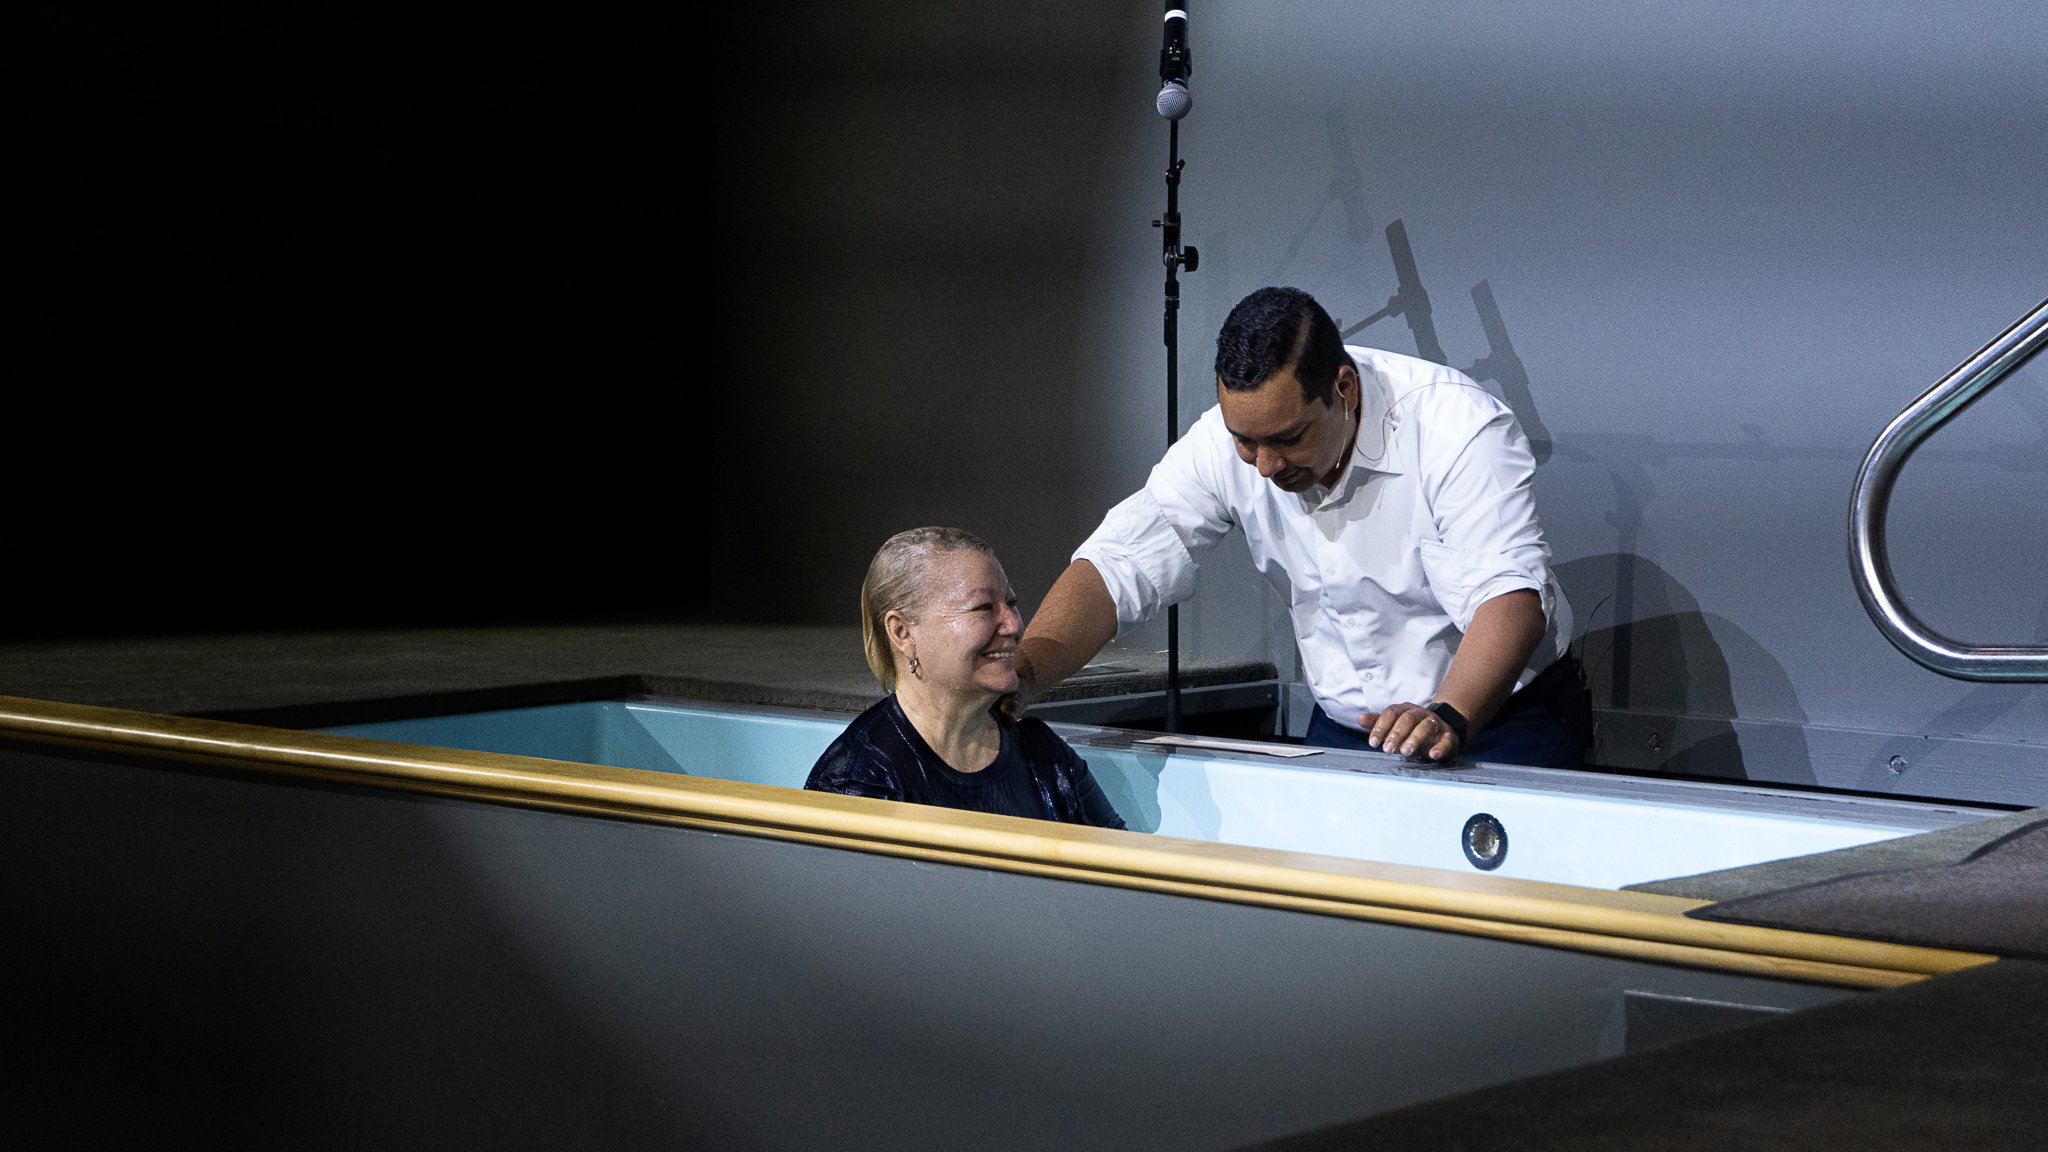 Some Sundays, we may have scheduled Baptisms for people who have found new life in Christ. Have questions about Baptism? Click here!